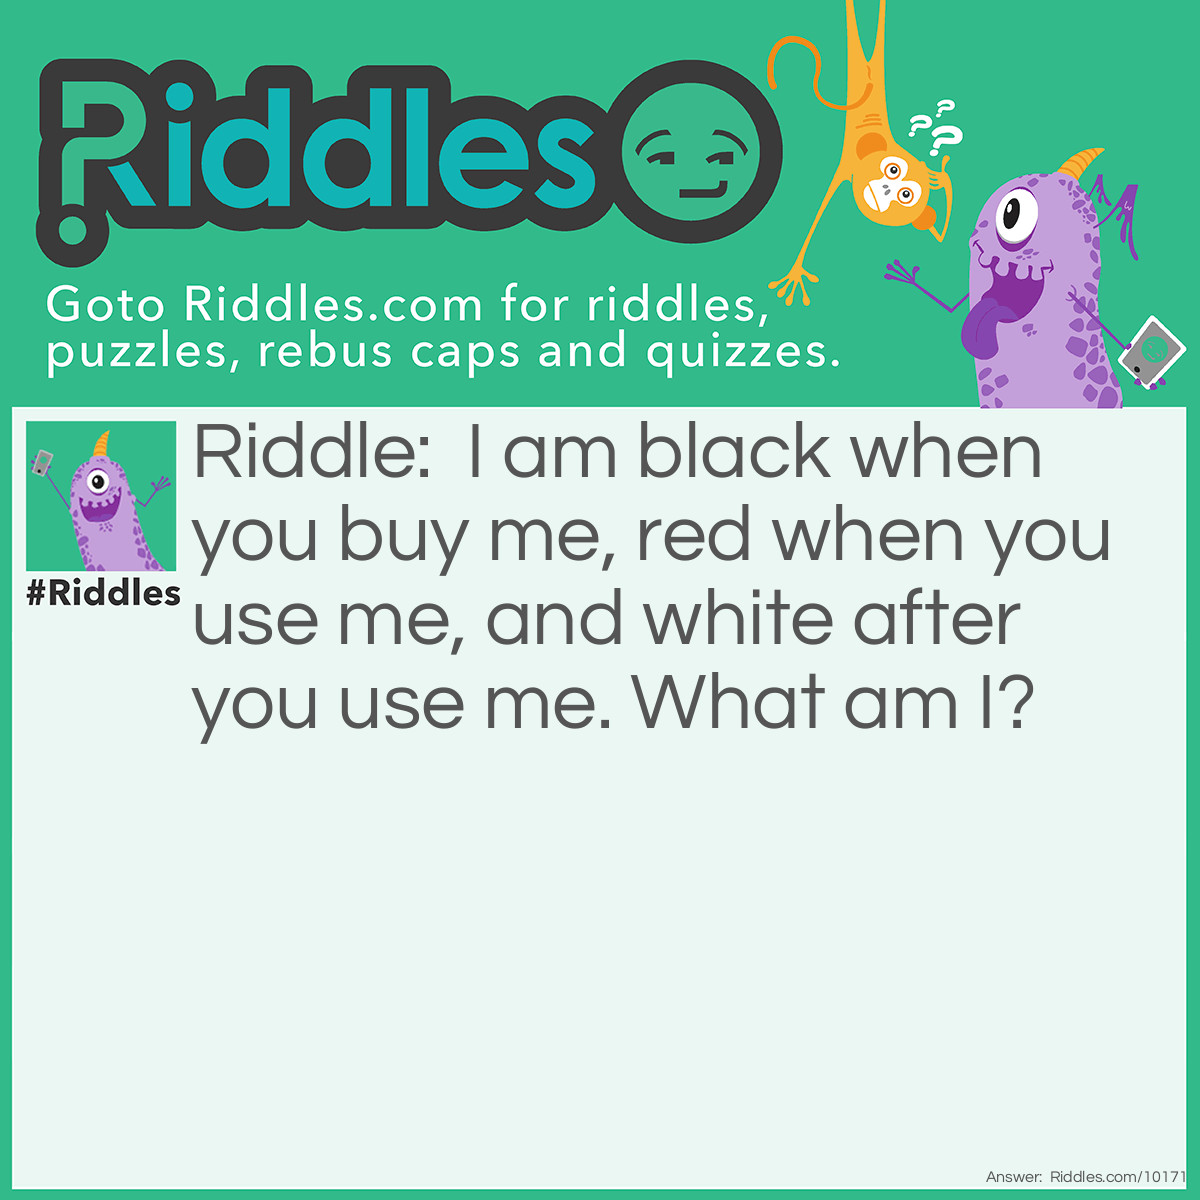 Riddle: I am black when you buy me, red when you use me, and white after you use me. What am I? Answer: Coal